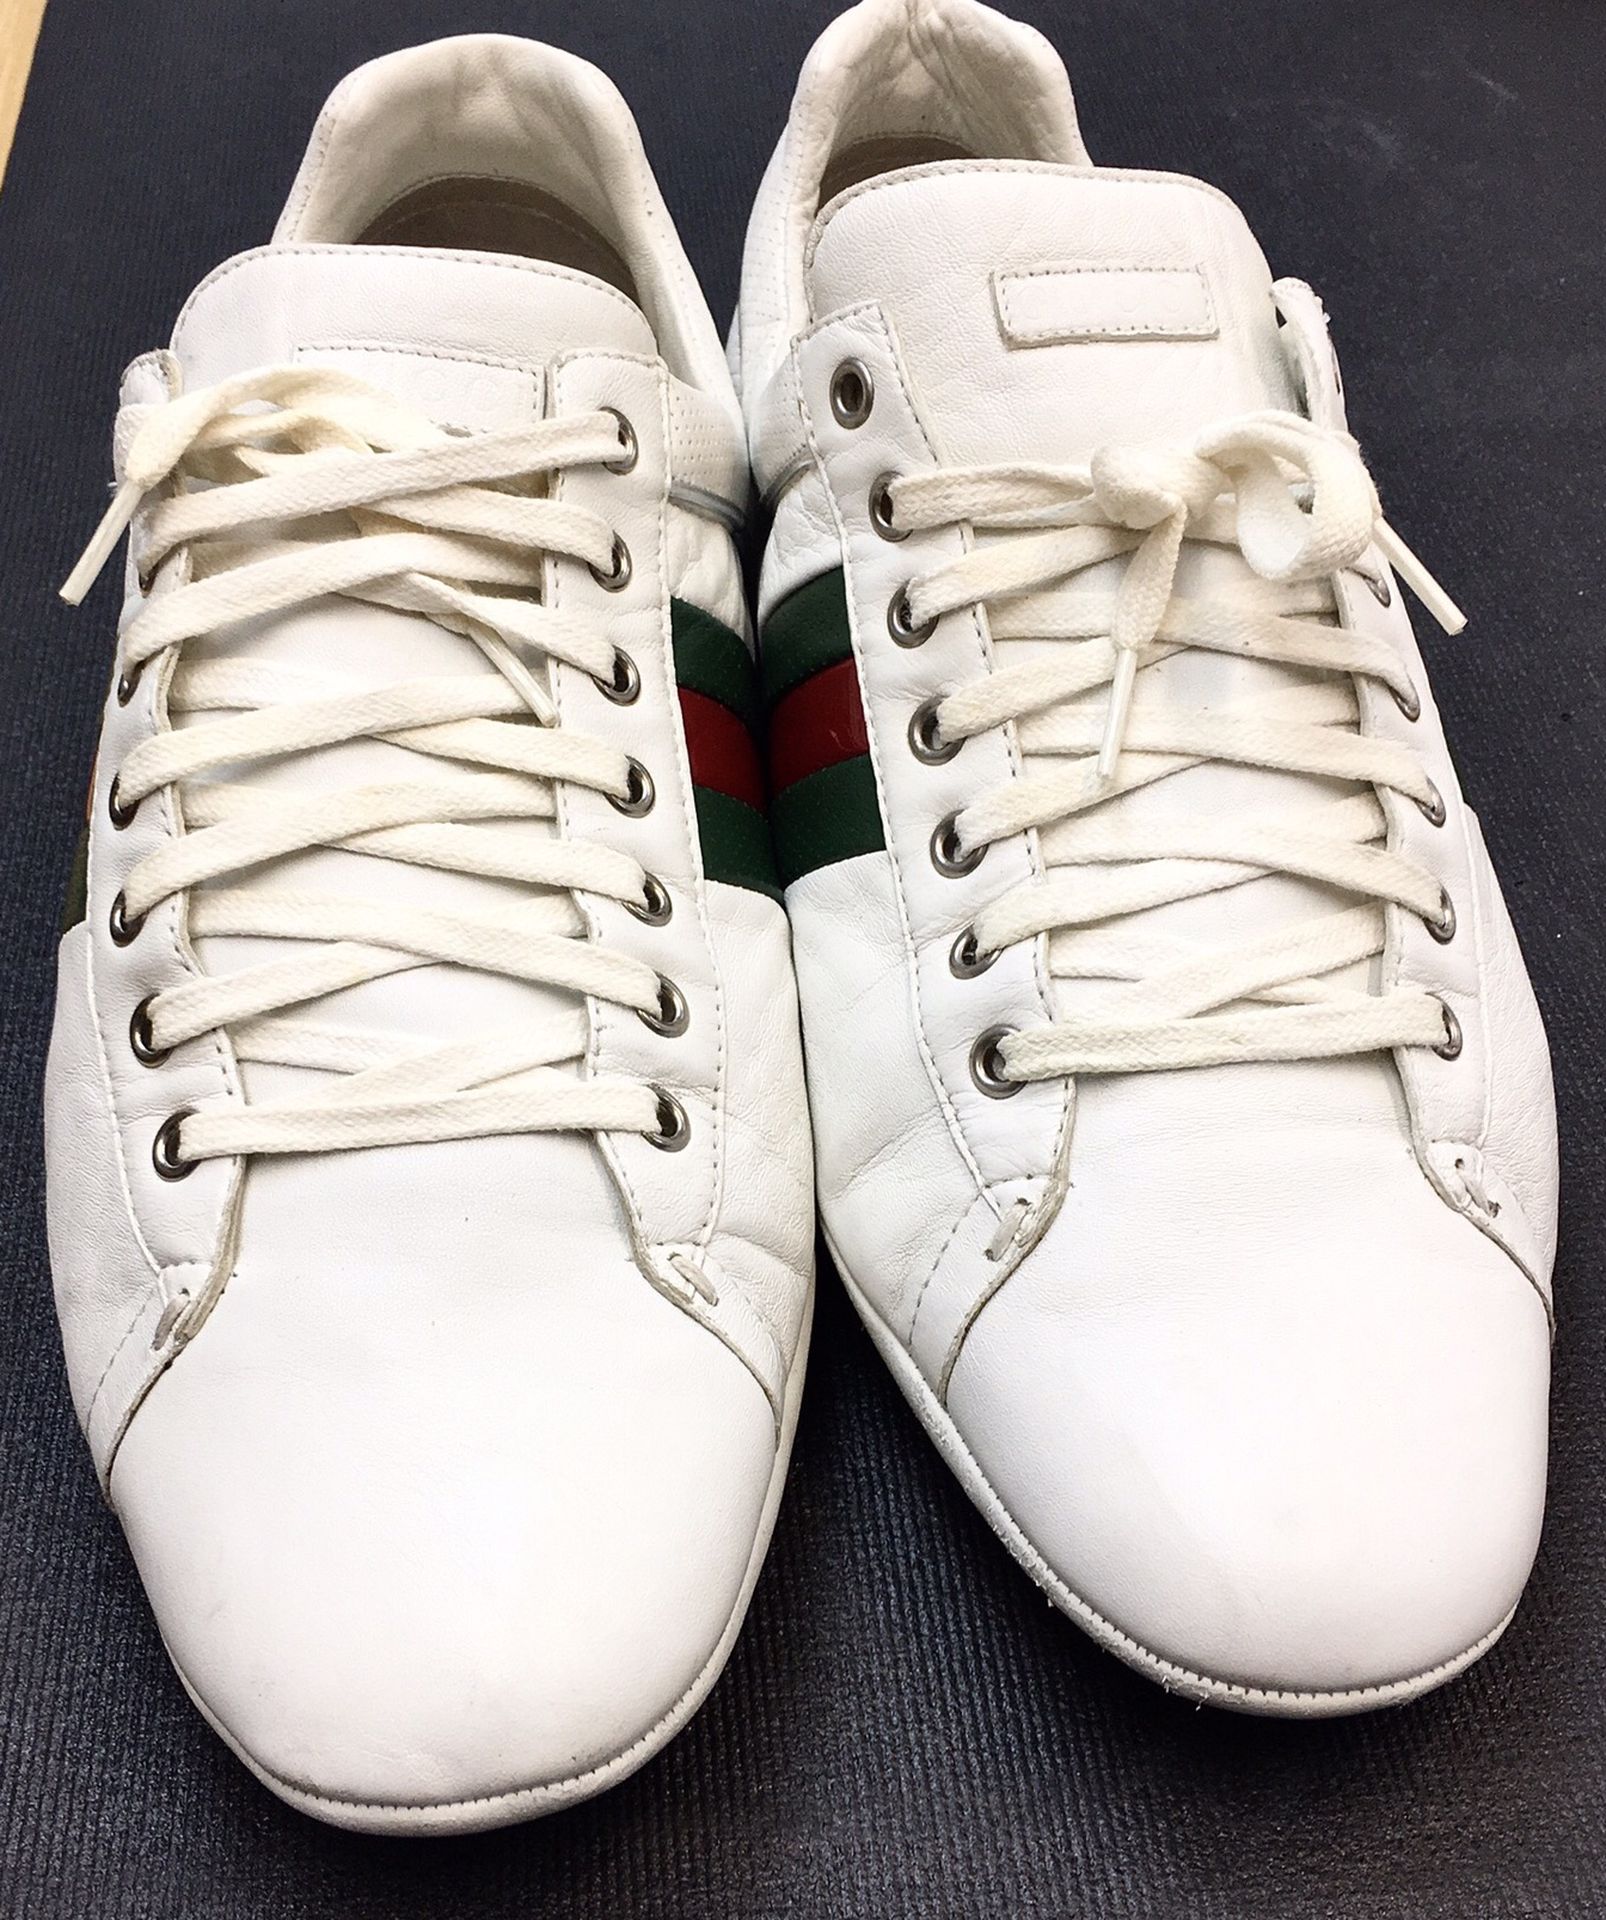 Gucci Men White Leather Bdeno Sneakers (256824) 12G for Sale in Fort  Lauderdale, FL - OfferUp